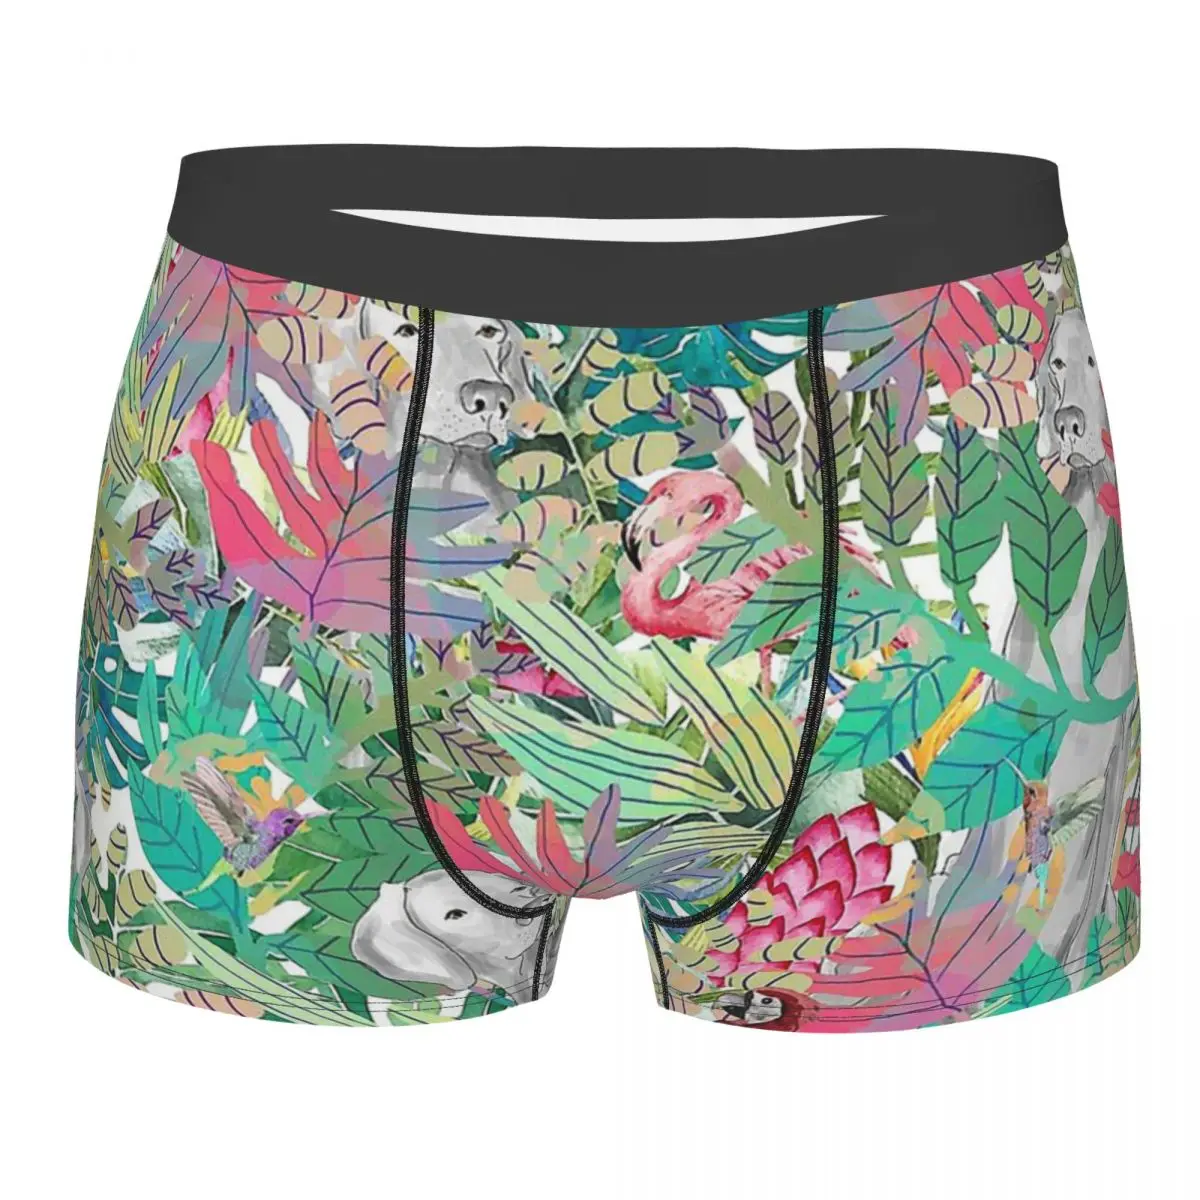 

WEIMS Tropical Leaves Beach Cool Underpants Breathable Panties Shorts Boxer Briefs Man Underwear Ventilate